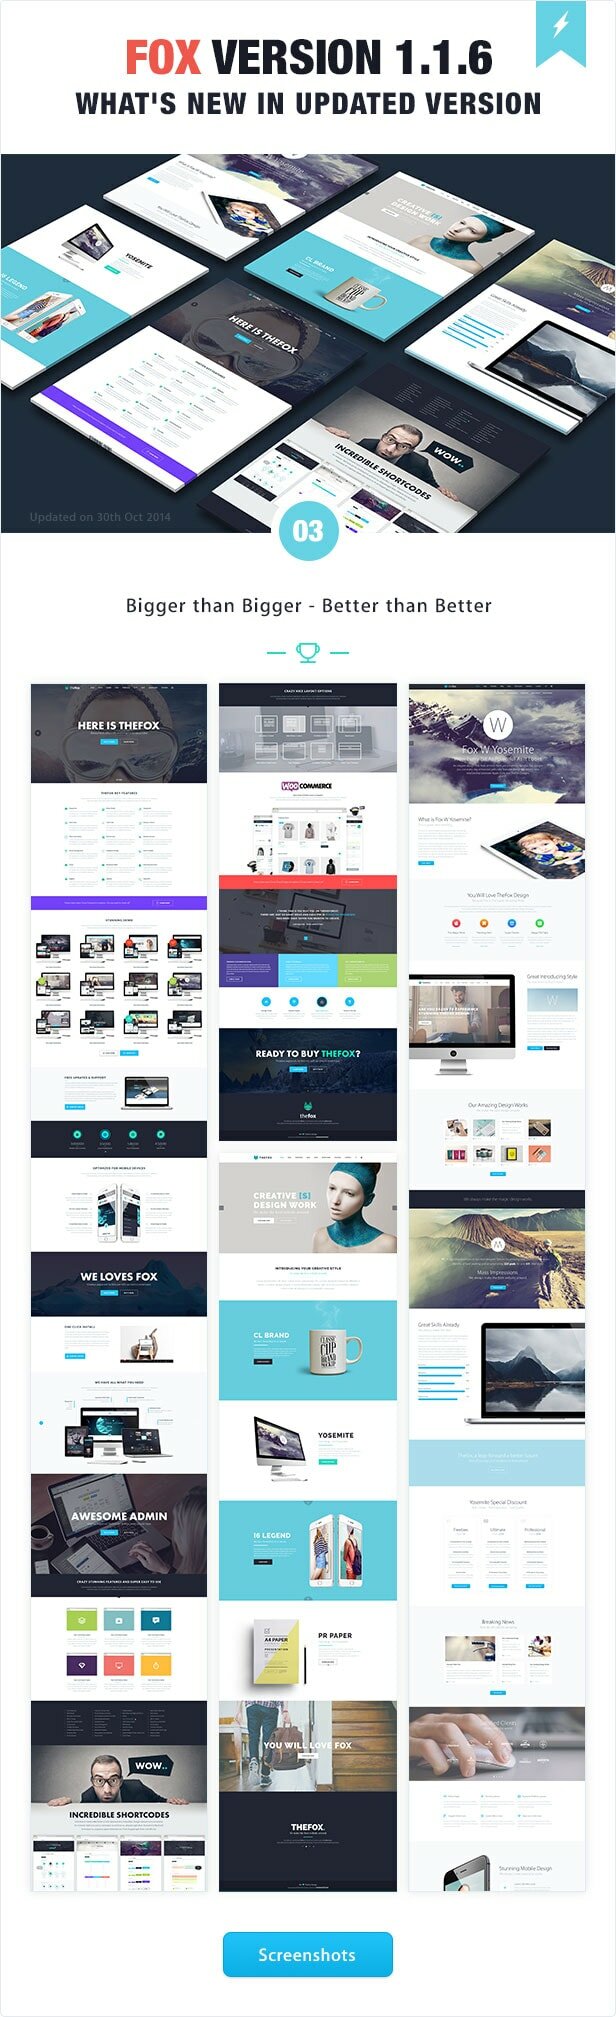 thefox 240 psd template - the best on Envato Market - Themeforest's trending theme